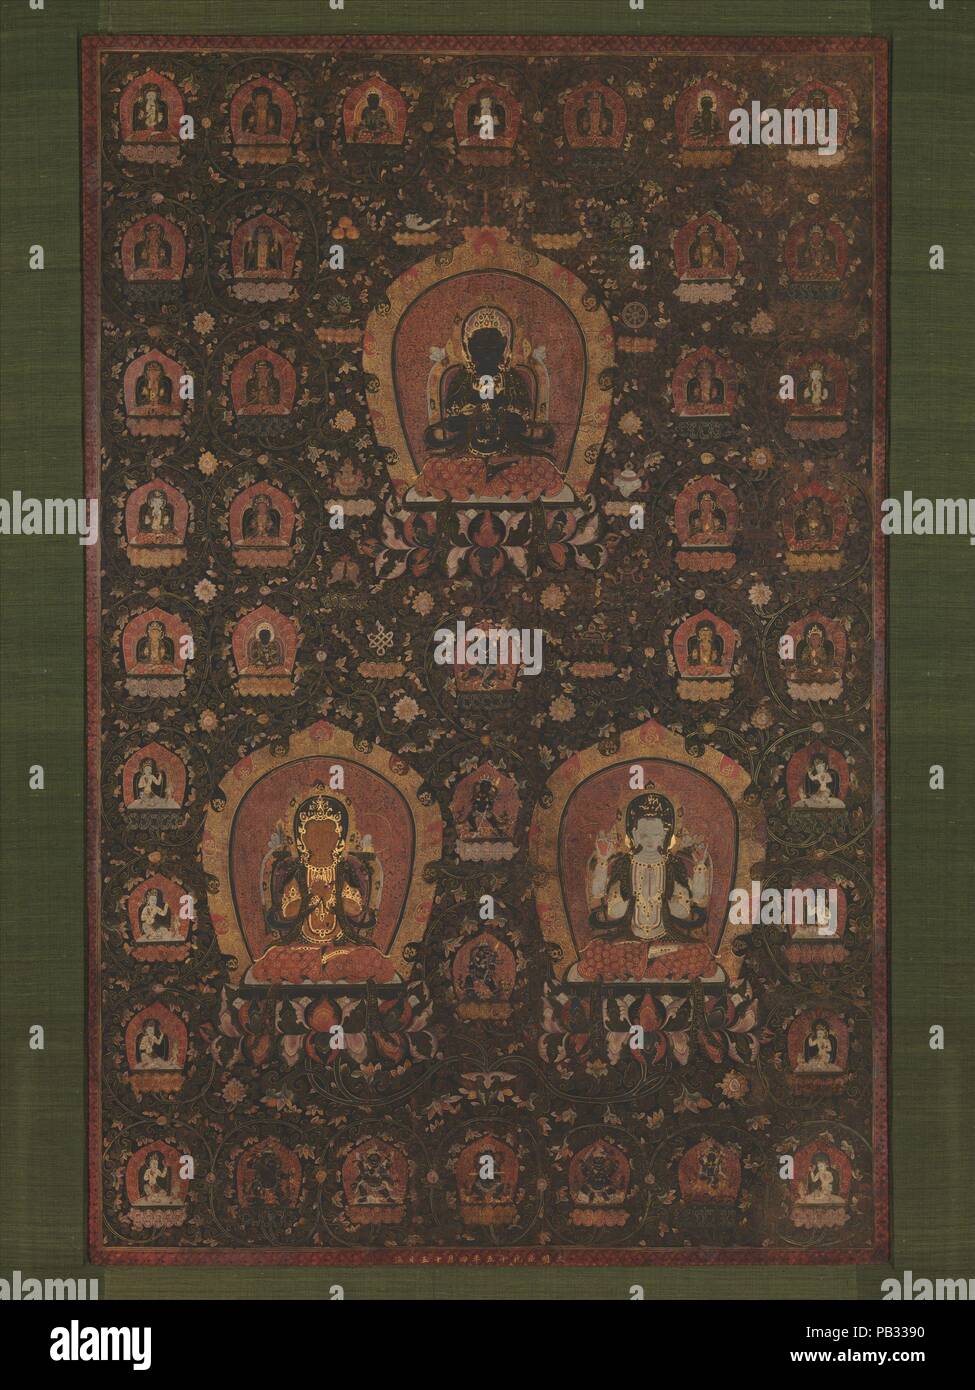 Mandala of Vajradhara, Manjushri and Sadakshari -Lokeshvara. Artist: Unidentified Artist. Culture: China. Dimensions: Image: 58 x 37 1/2 in. (147.3 x 95.3 cm). Date: dated 1479.  The Tibetan branch of Esoteric Buddhism, introduced into China during the Mongol Yuan dynasty (1279-1368), continued to be patronized by early Ming dynasty emperors. Throughout the fifteenth century, a significant community of Tibetan lamas remained active in Beijing, the site of the former Mongol capital city, Dadu, and after 1402 the principal Ming capital.  This mandala, or cosmic diagram used in meditation, is pai Stock Photo